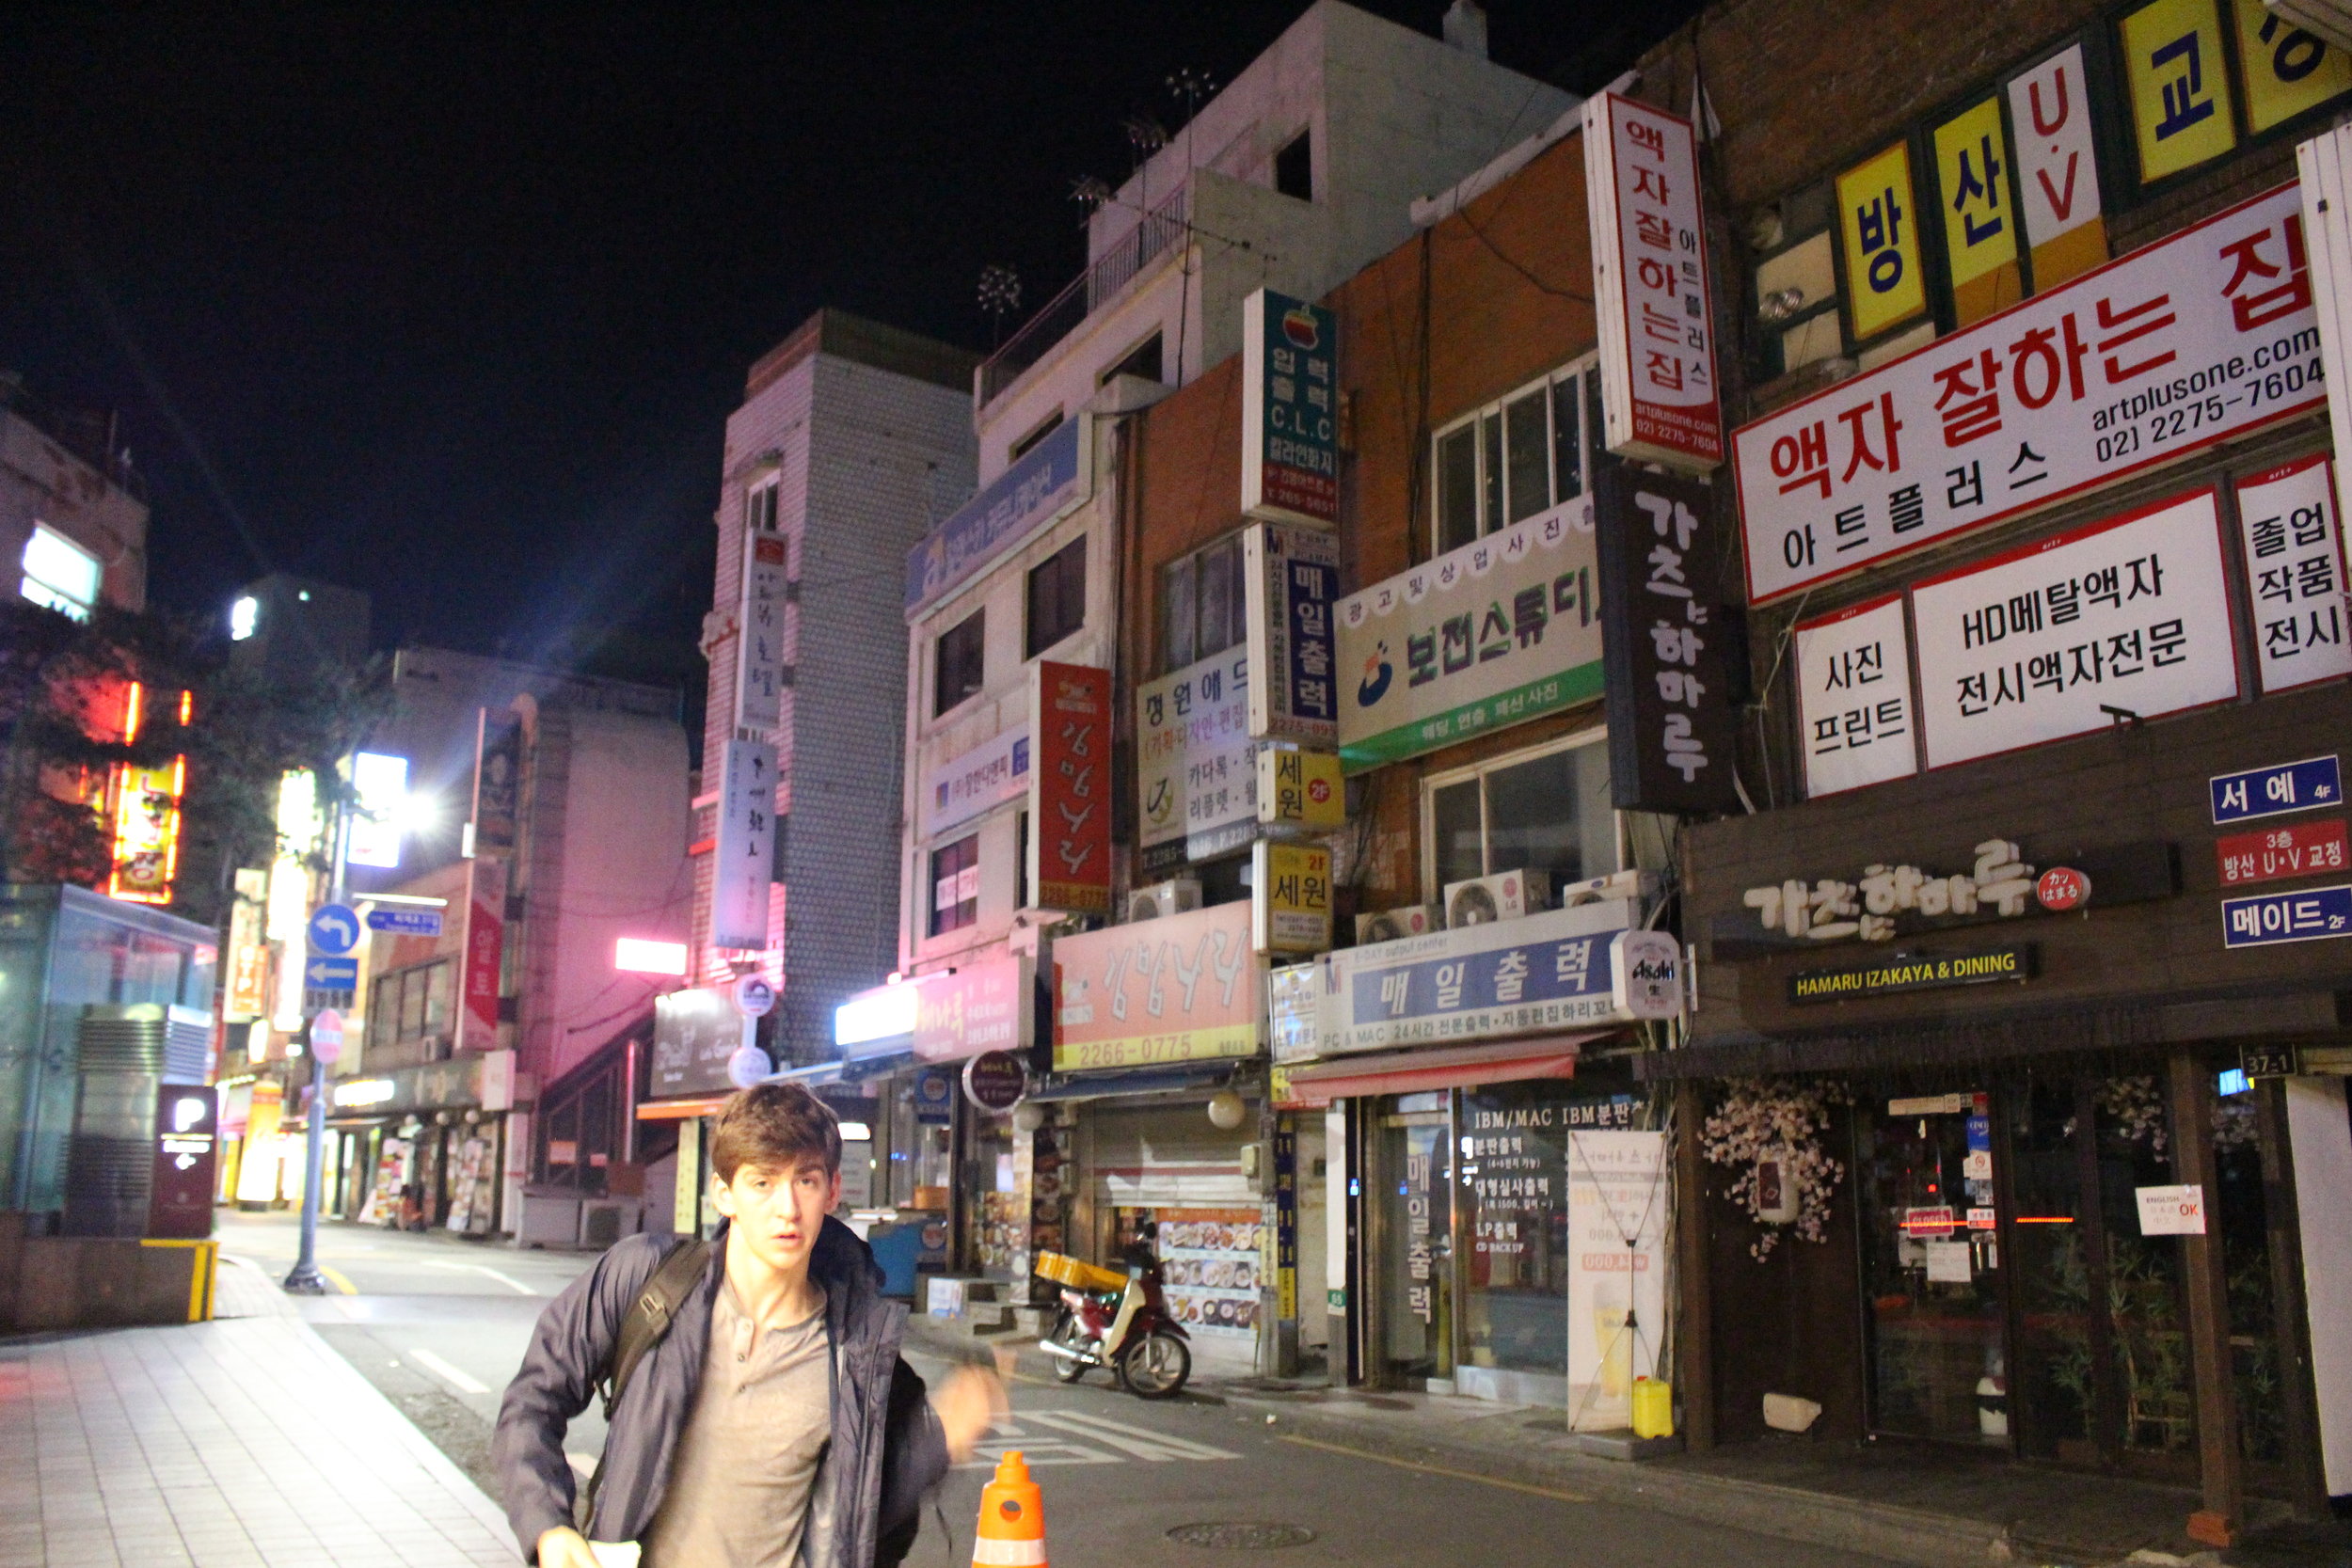  Jacob ('19) on the first night in Seoul, South Korea 